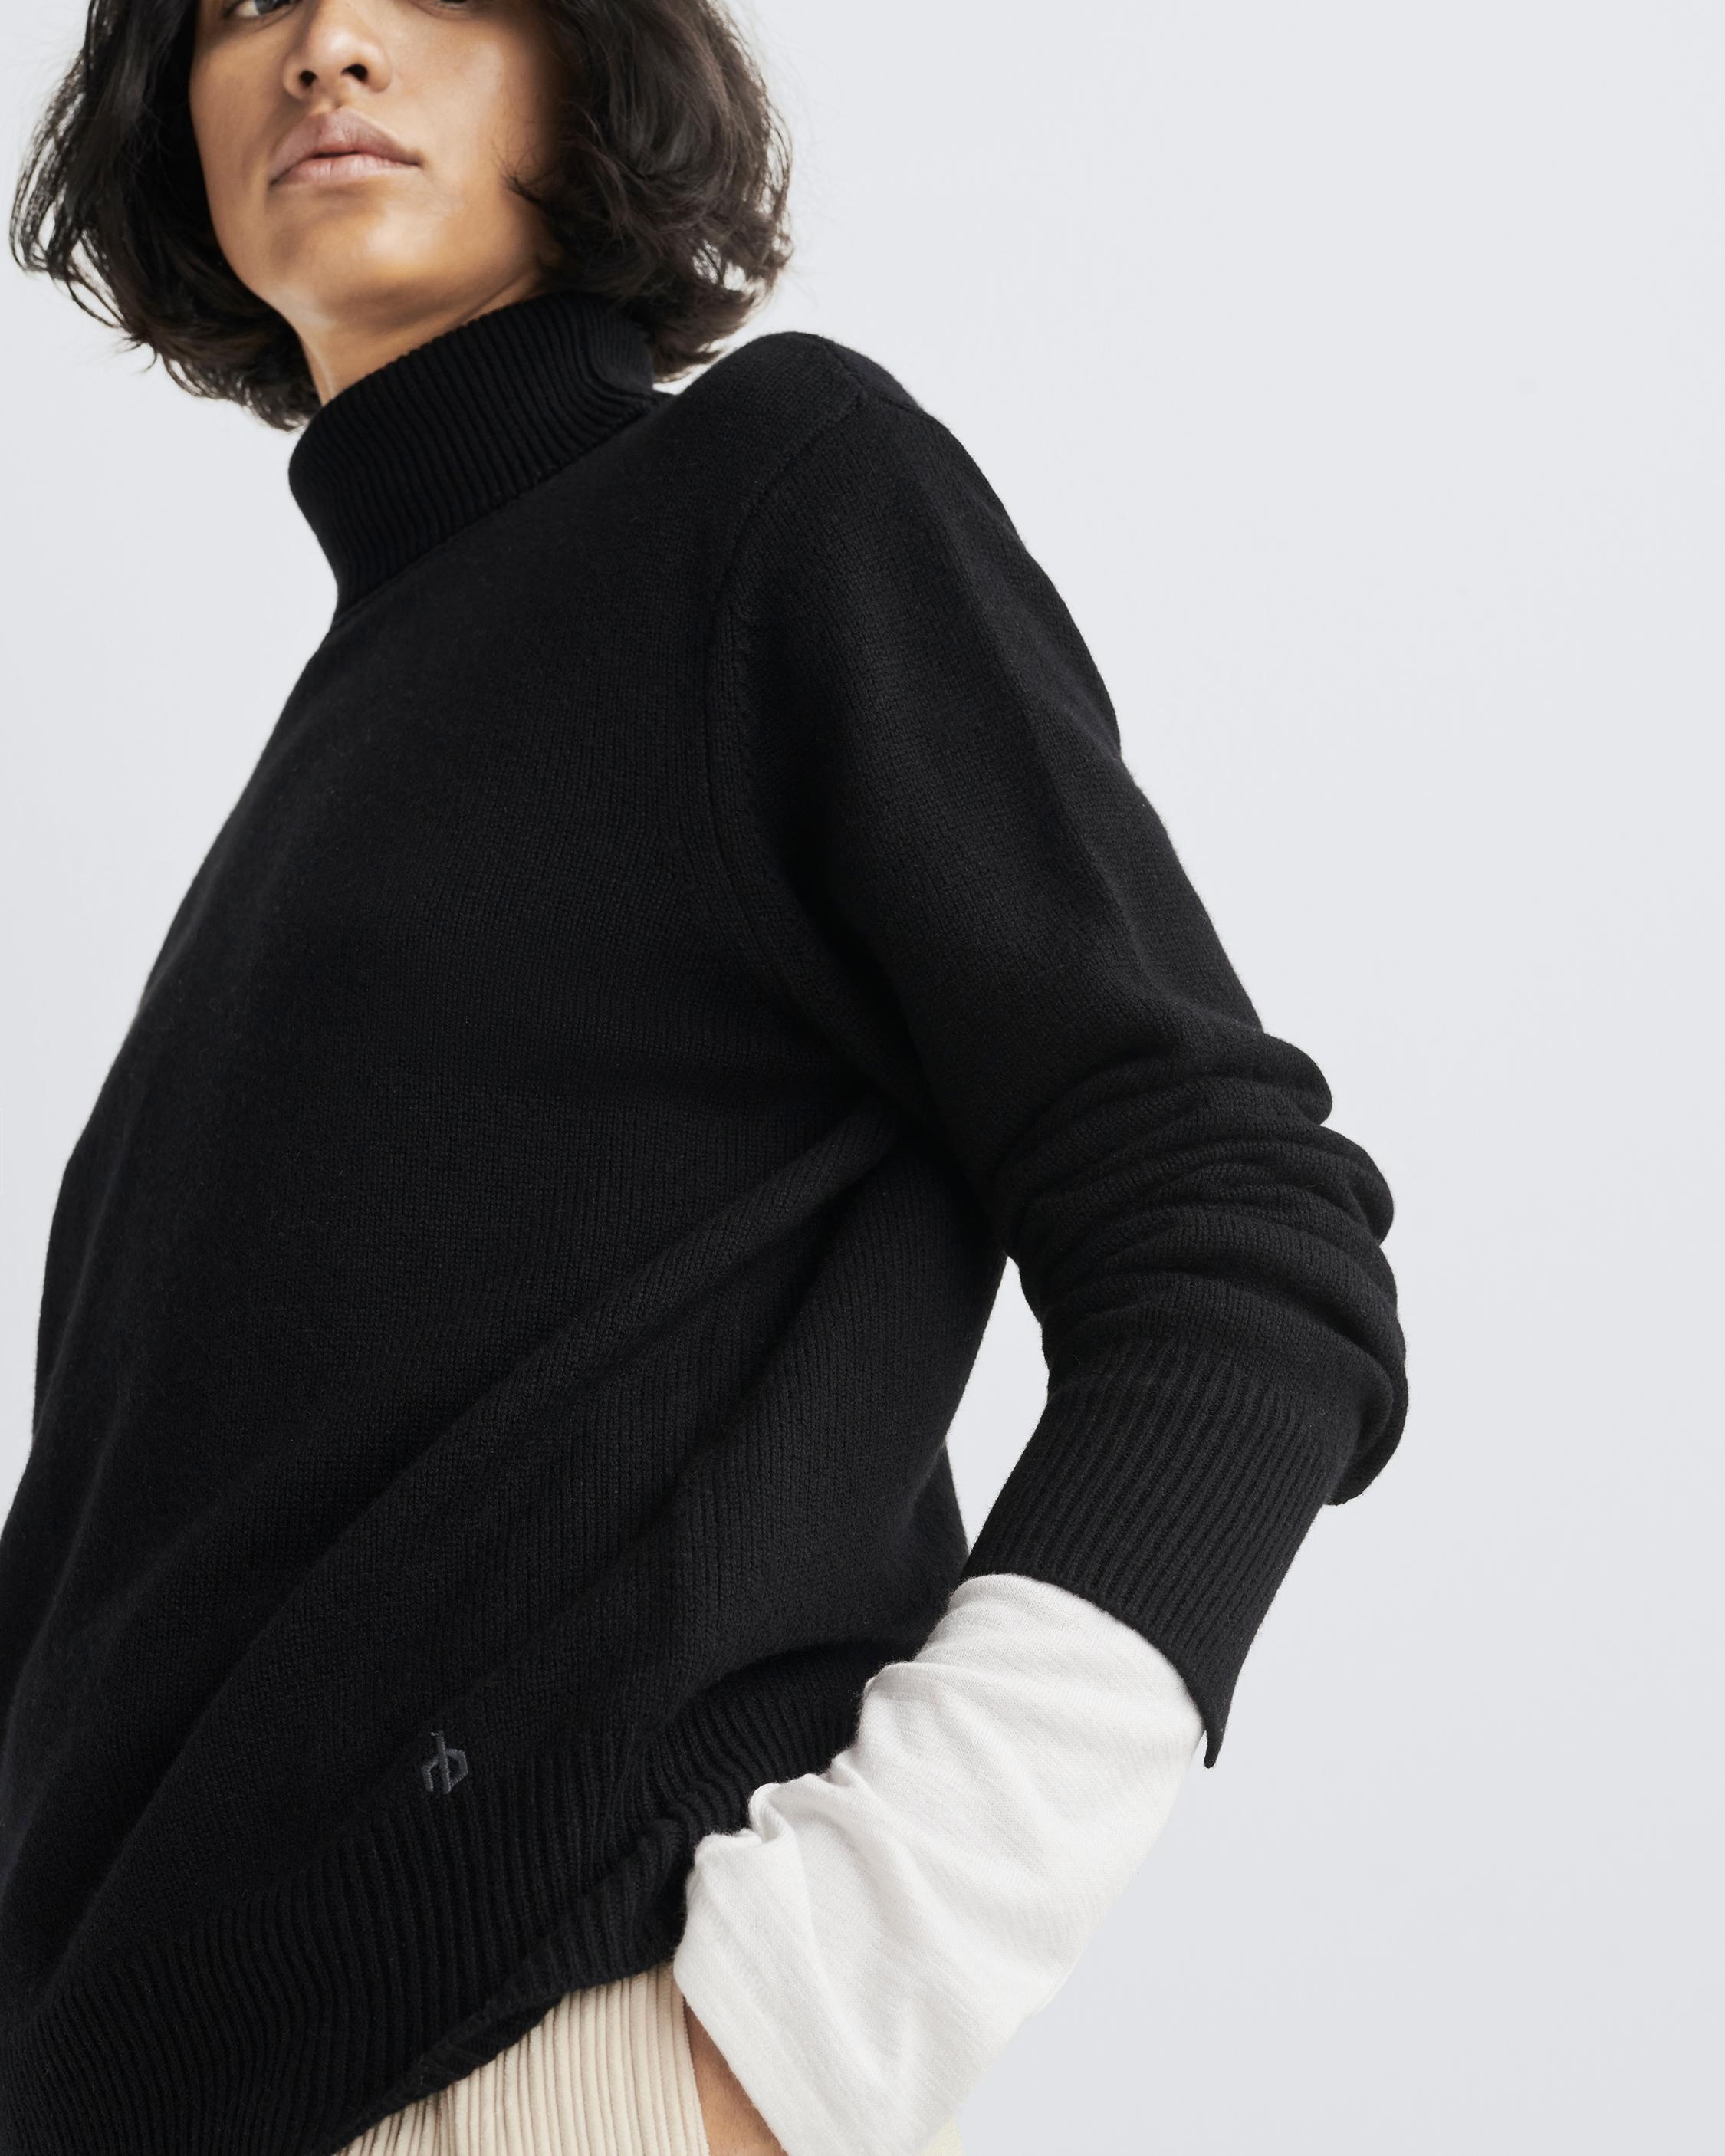 Talan Cashmere Turtleneck
Relaxed Fit - 2